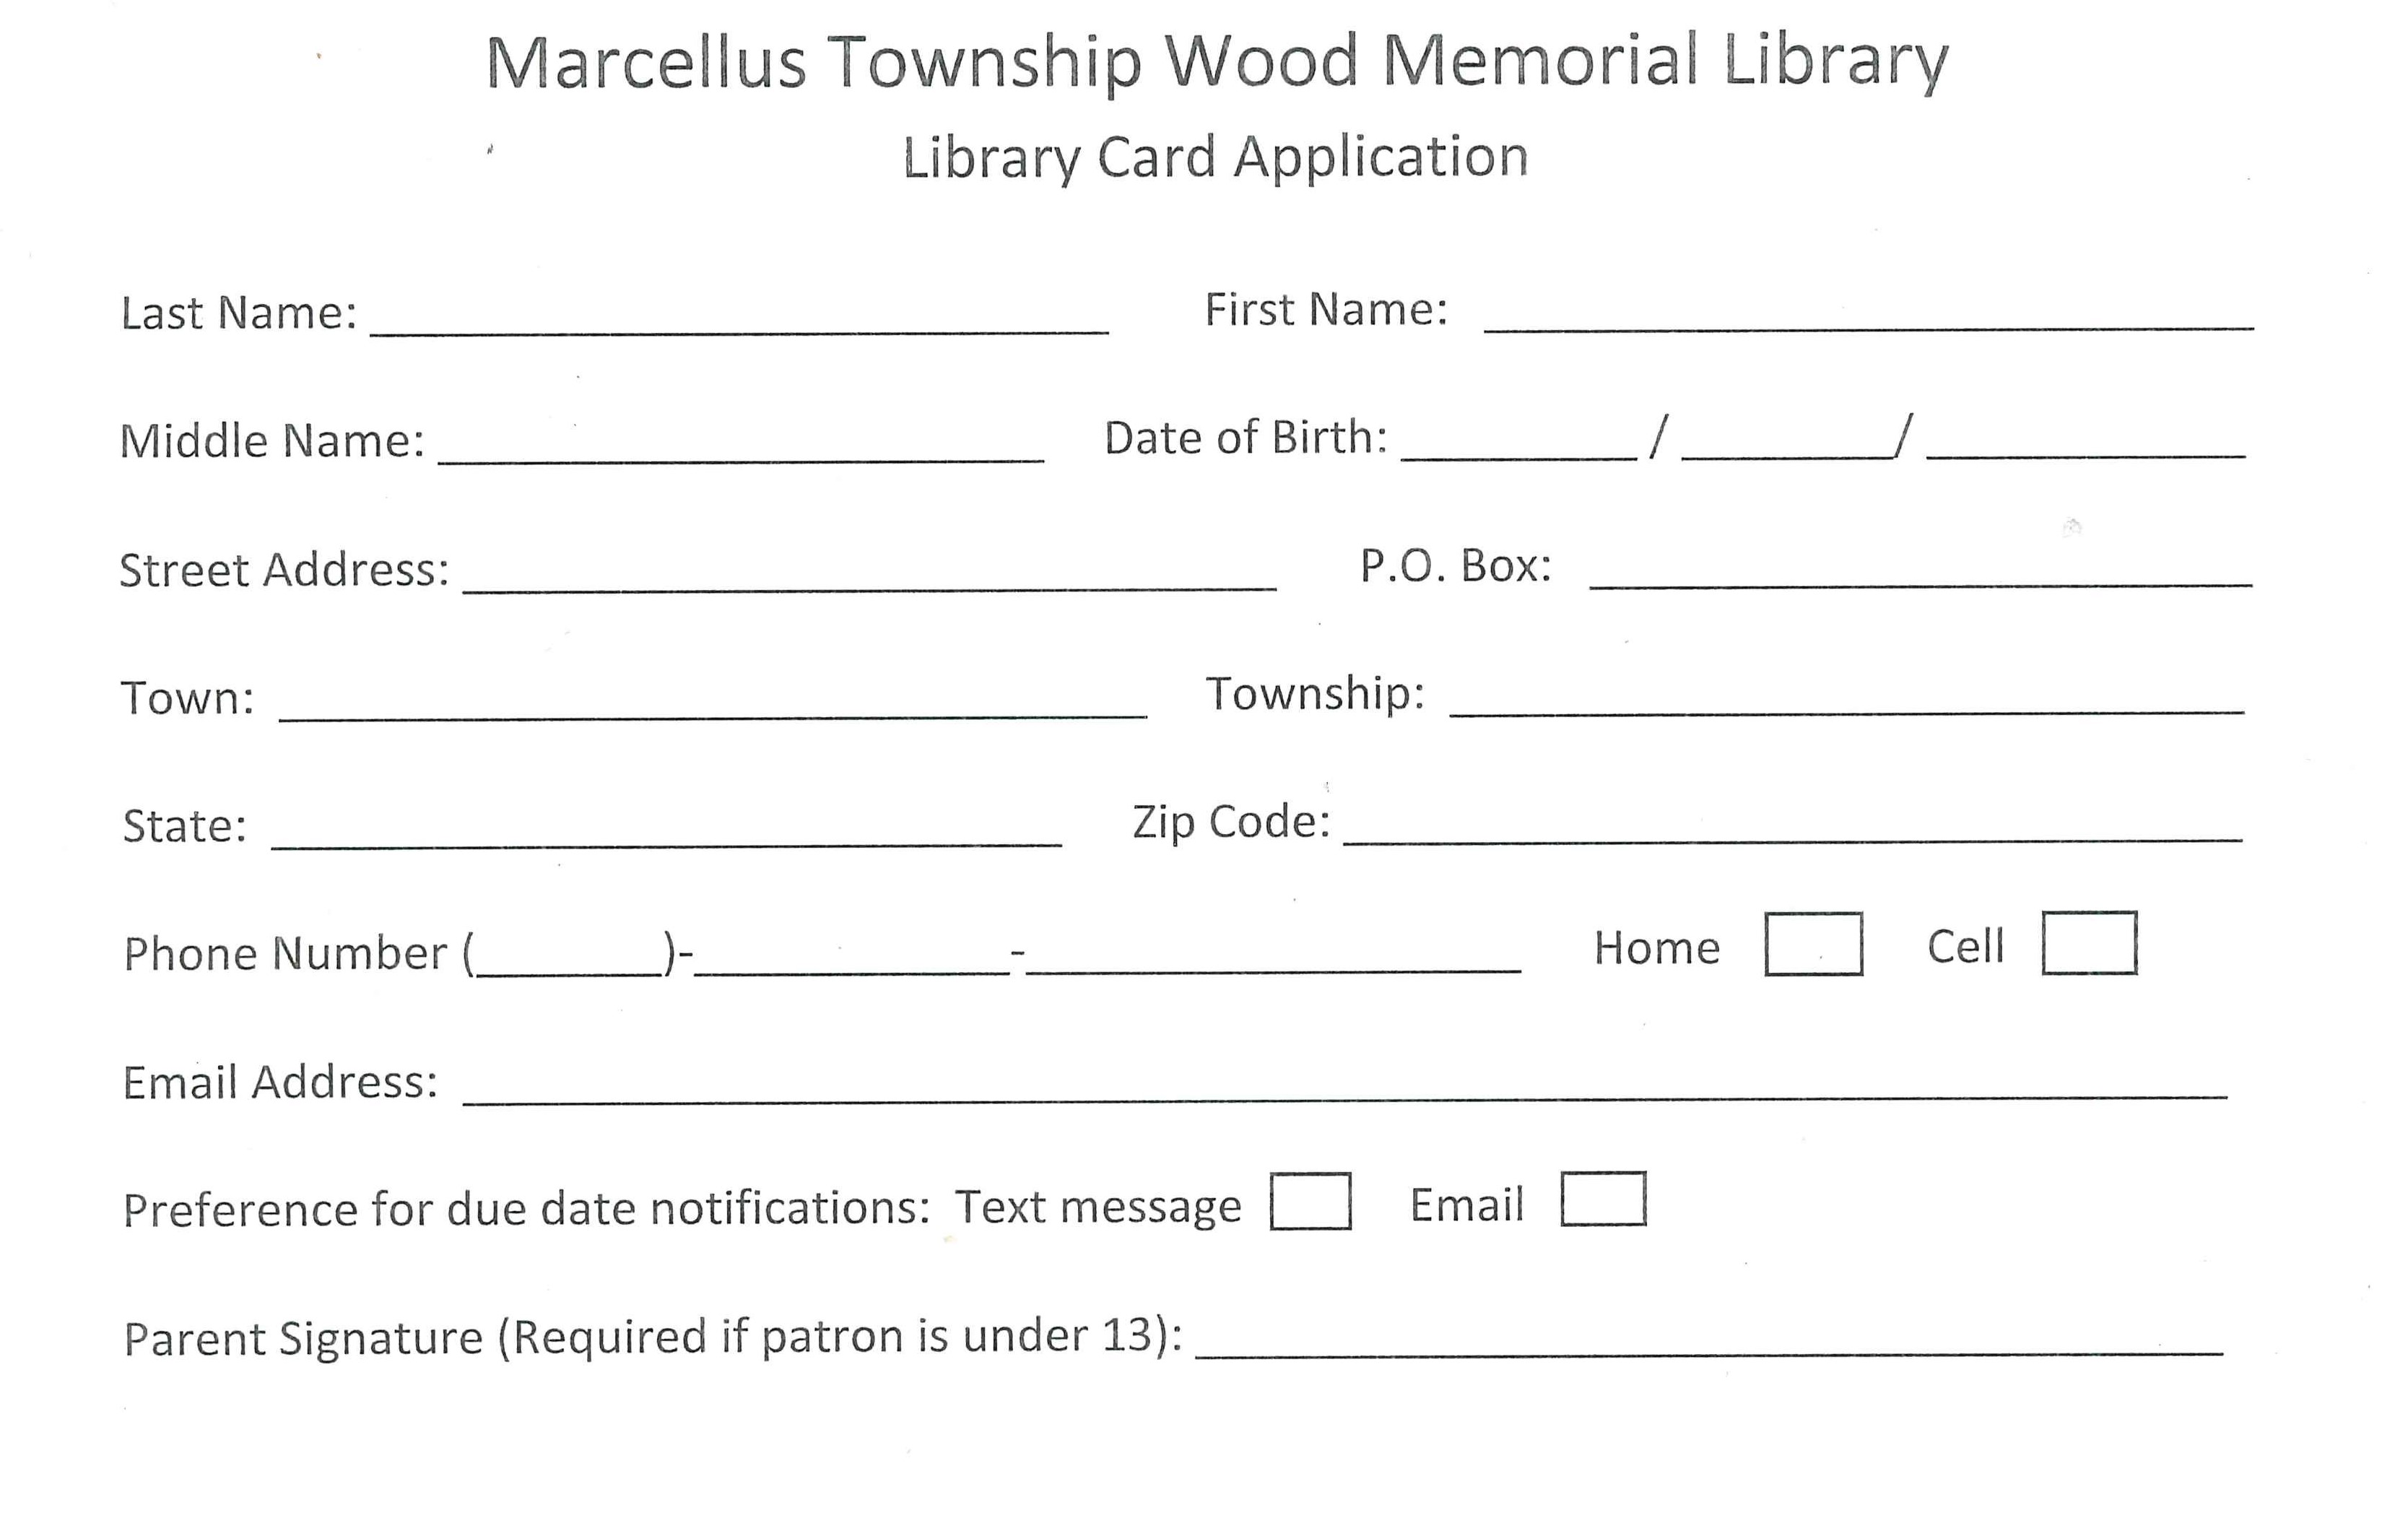 Marcellus Township Wood Memorial Library Card Application